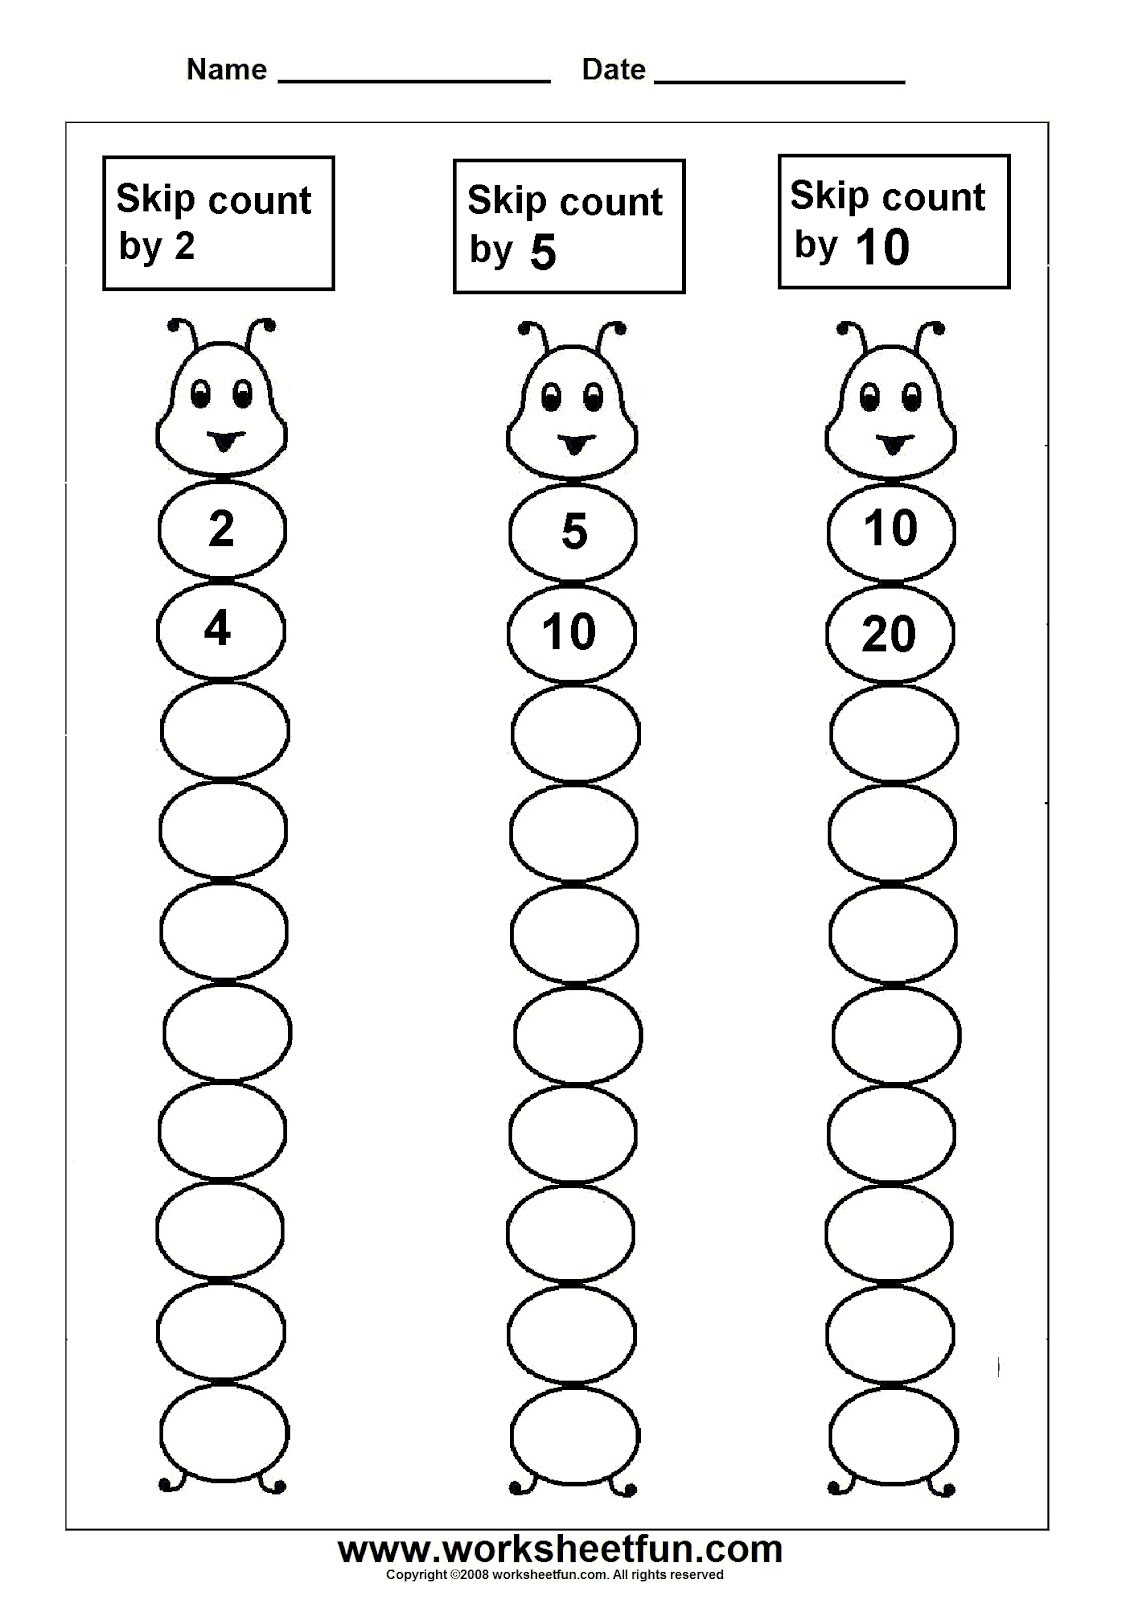 Counting by 5s Worksheet Skip Counting Worksheets First Grade